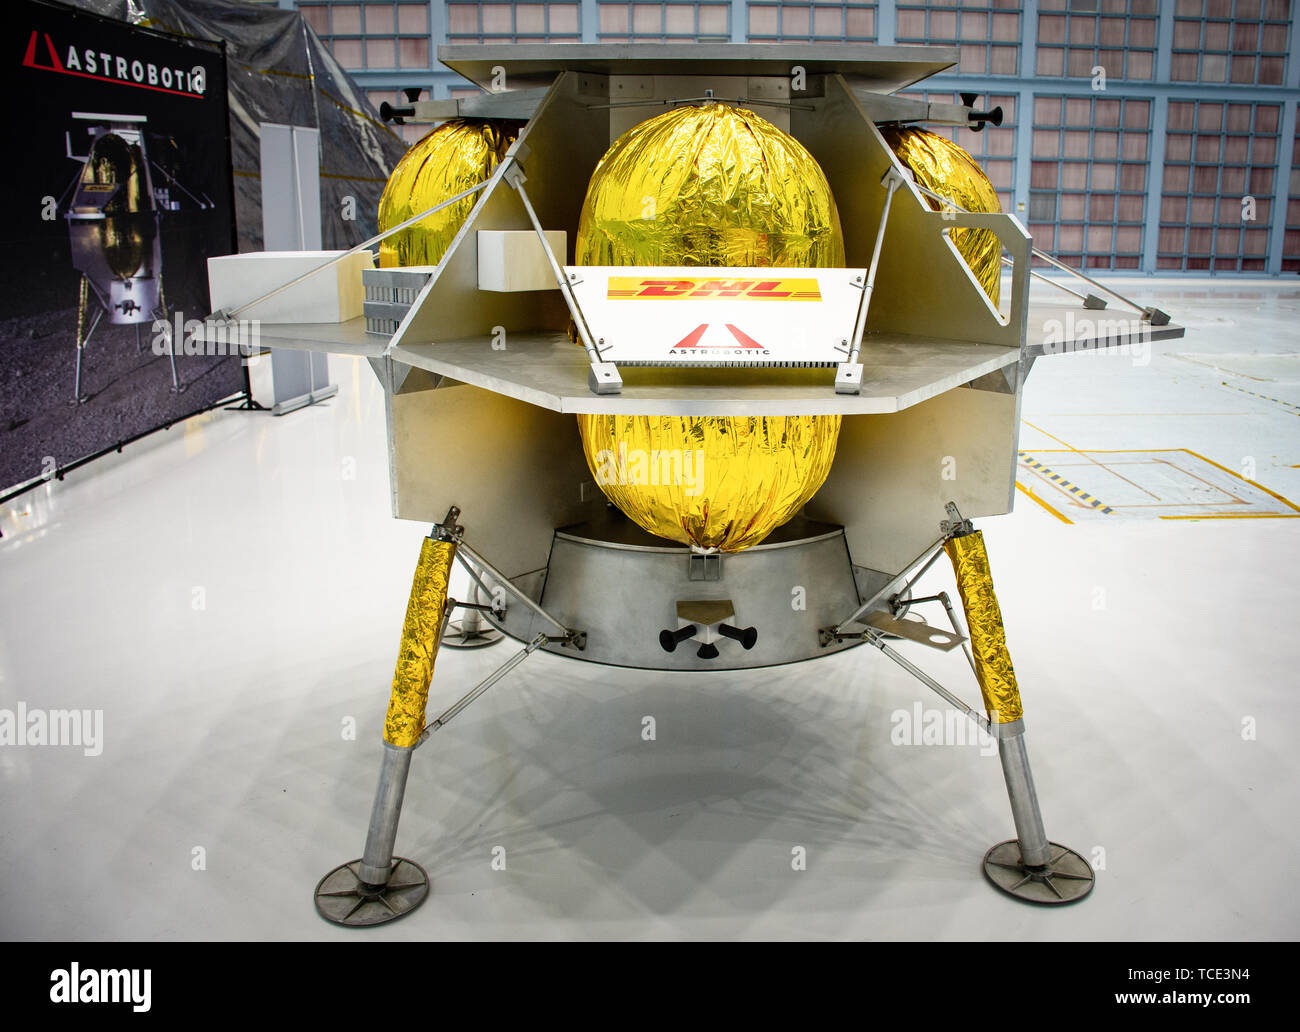 The Astrobotic Peregrine lunar lander, designed for the NASA Commercial Lunar Payload Services Artemis program on display at the Goddard Space Flight Center May 31, 2019 in Greenbelt, Maryland. The land was one of the three commercial providers selected by NASA to carry a payload to the lunar surface by 2014. Stock Photo